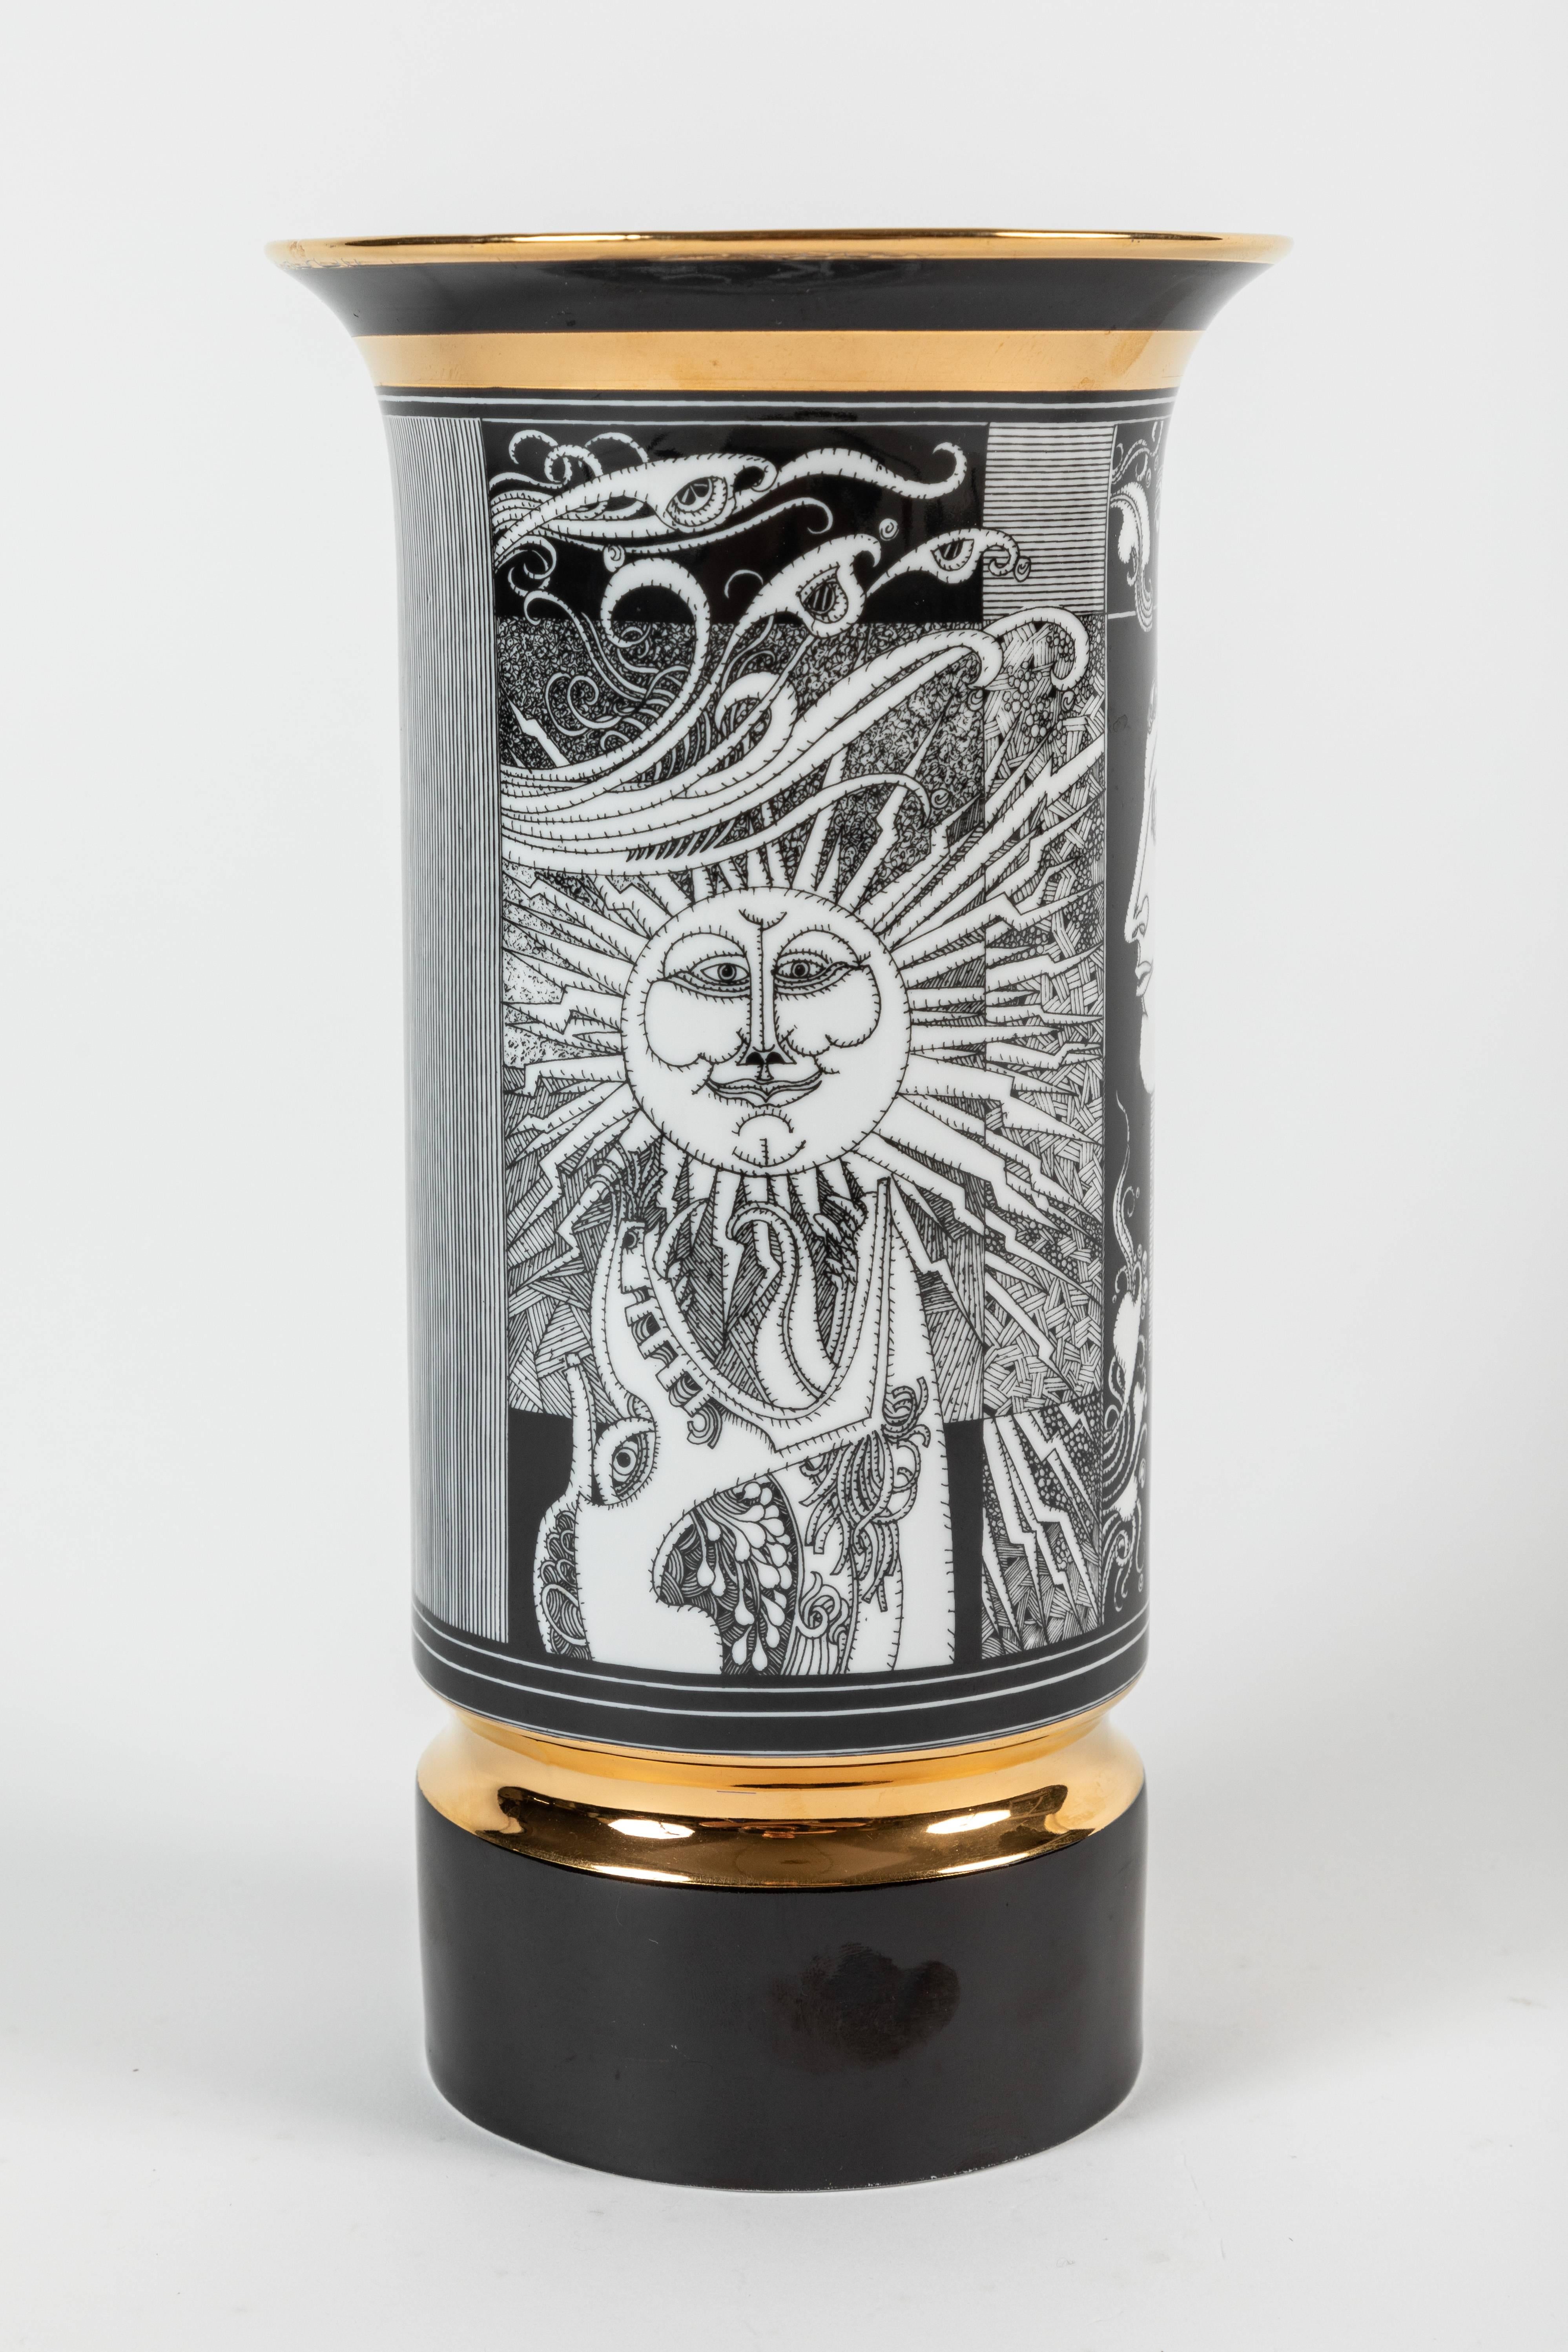 An exquisite pair of cylinder porcelain vases by Endre Szasz for Hollóháza. One vase features a sun, moon and goddess in a stylized art deco type design, and the other vase features a goddess overlooking a field of flowers and butterflies. Both of